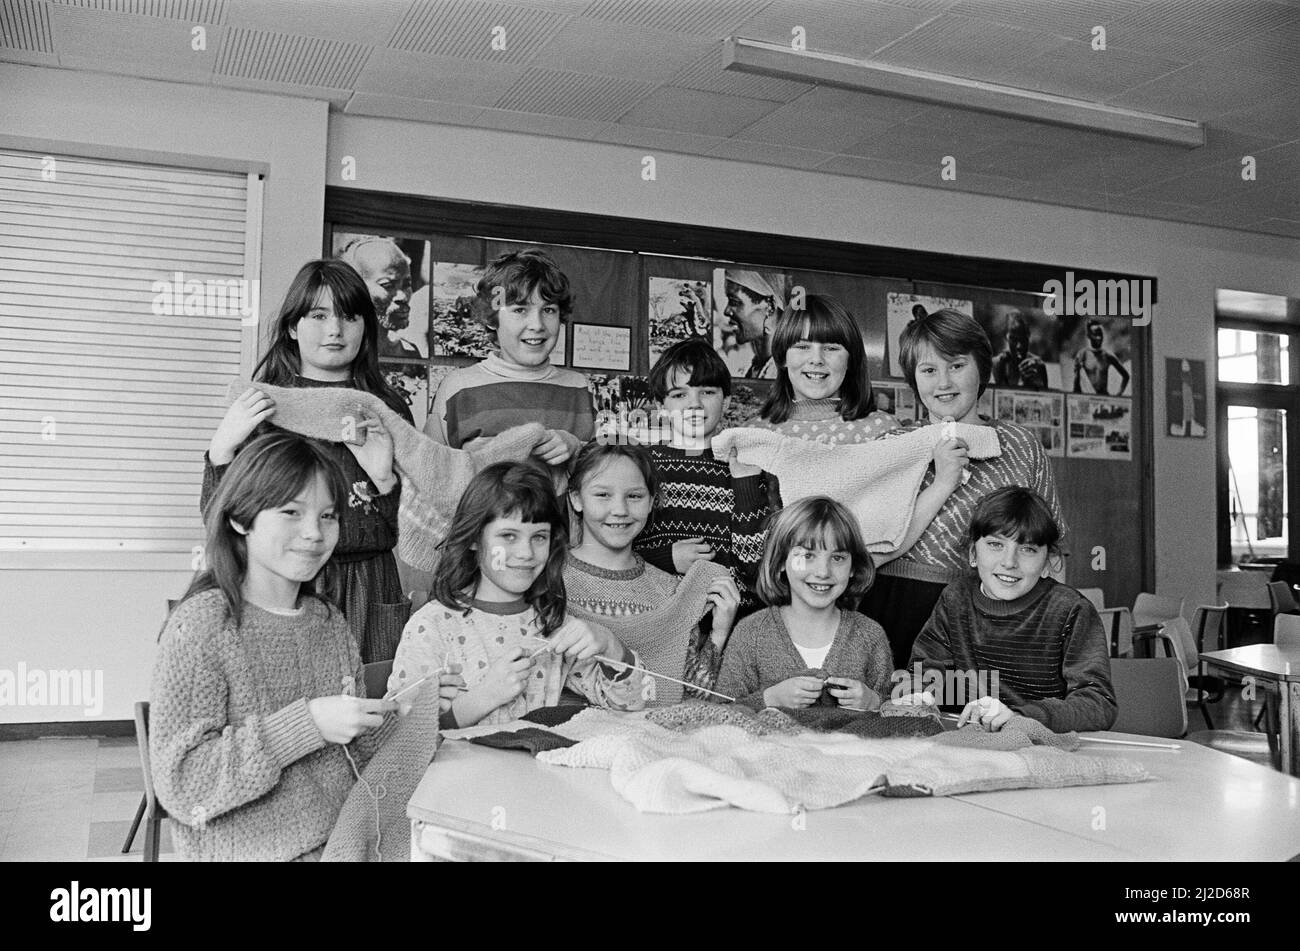 Knitting jumpers, cardigans and blankets for refugee camps in Ethiopia and Sudan are Lowerhouses Junior School pupils. Twenty children are involved in the charity knit. 13th February 1985. Stock Photo